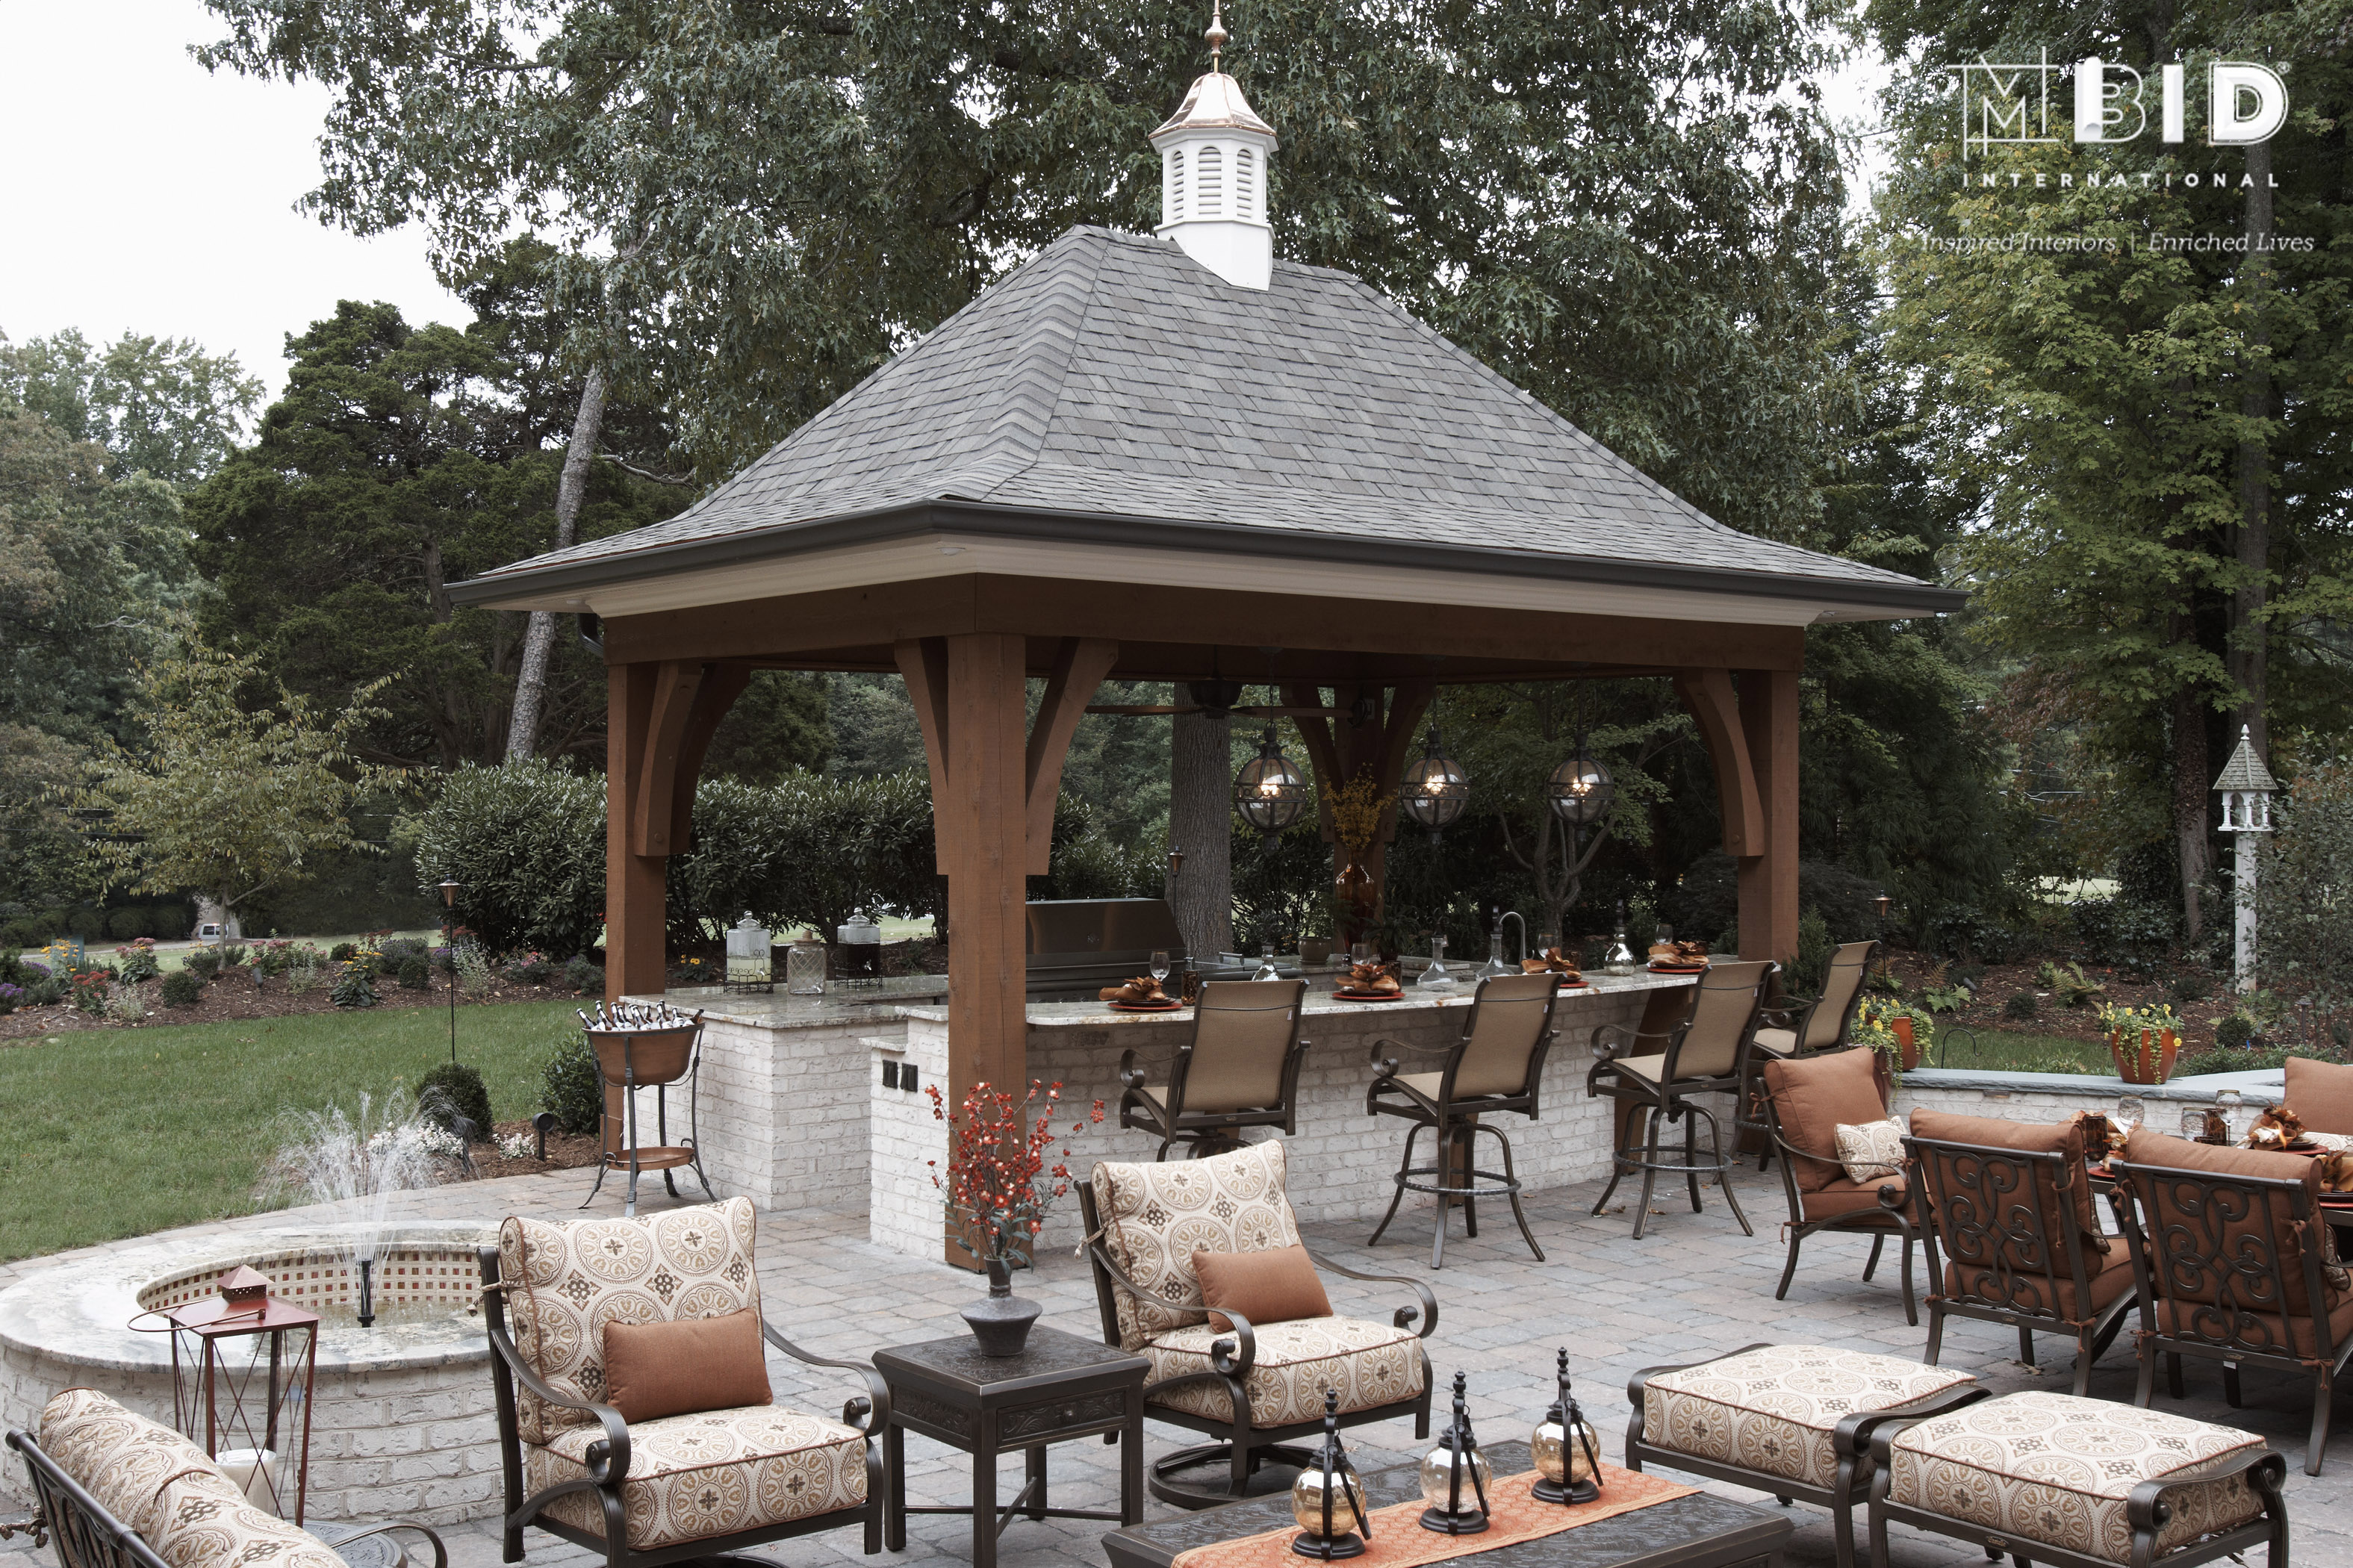 Outdoor Kitchen and Patio Designed for Entertaining! - MBID International